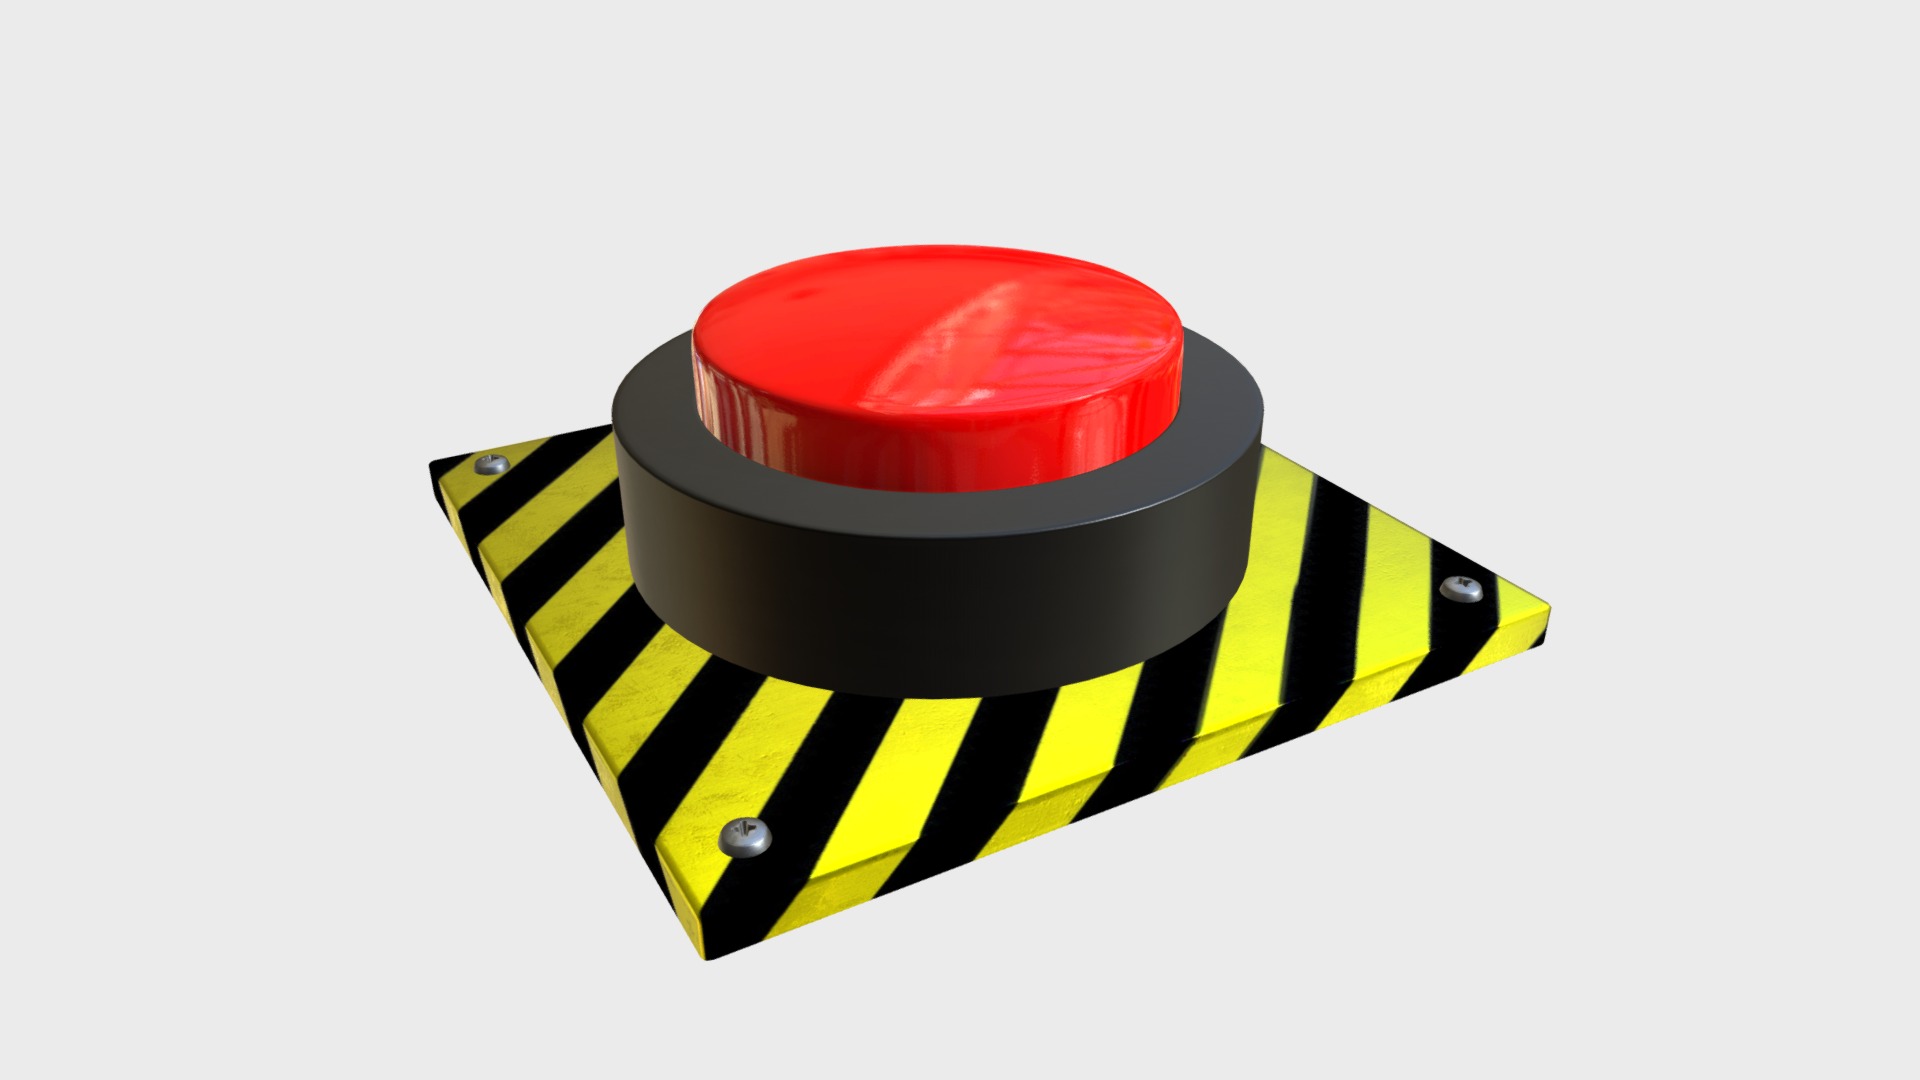 3D model Big red button - This is a 3D model of the Big red button. The 3D model is about chart.